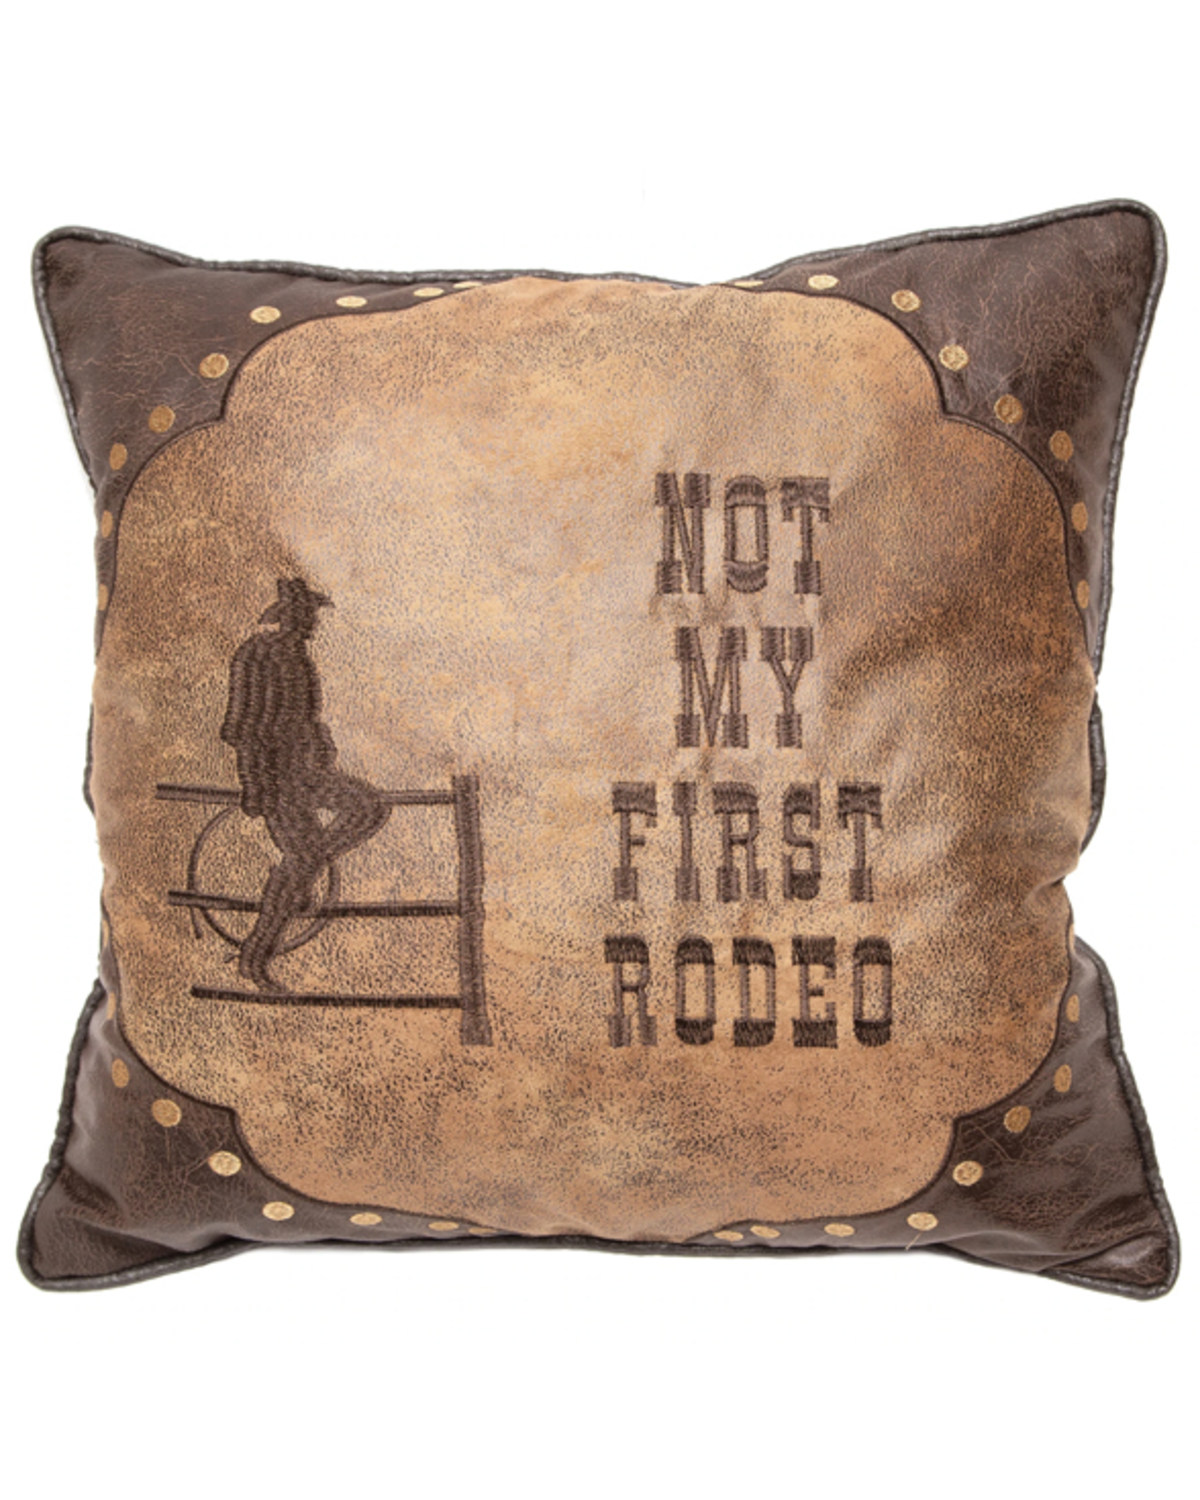 Carstens Home Rustic Not My First Rodeo Decorative Throw Pillow